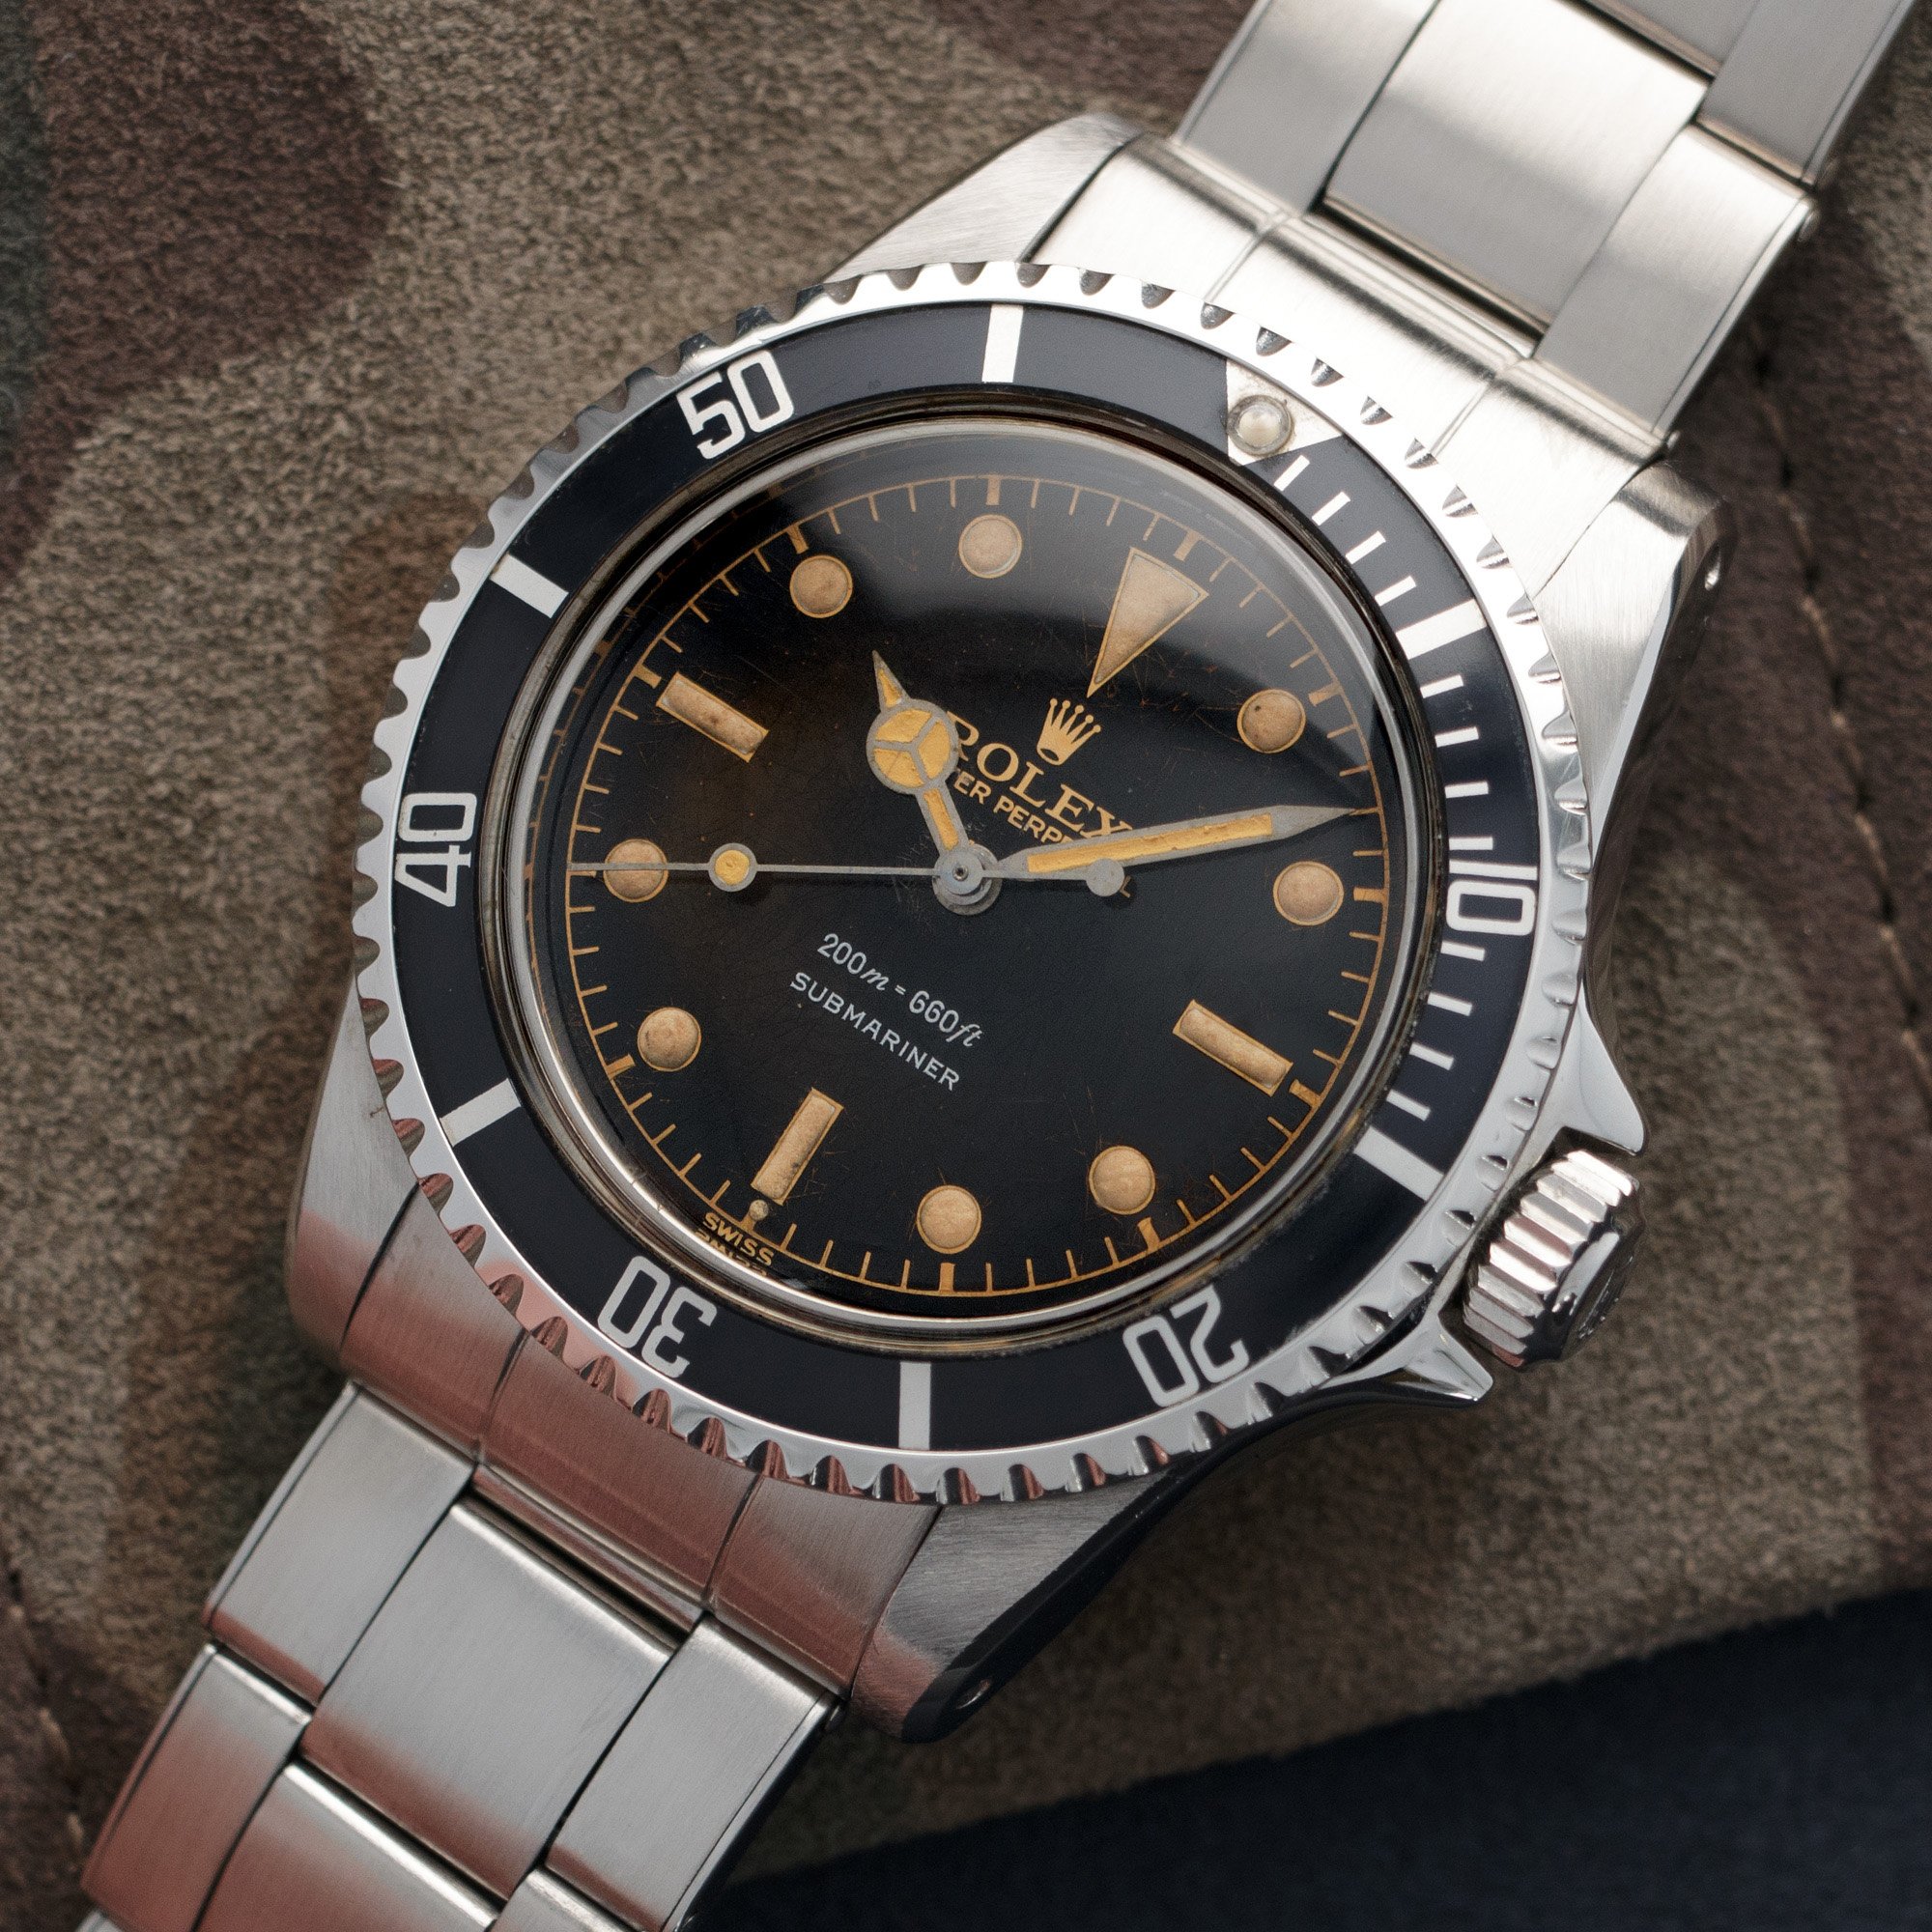 Rolex Submariner Ref. 5512 Exclamation Mark dial from 1962 - Rolex ...